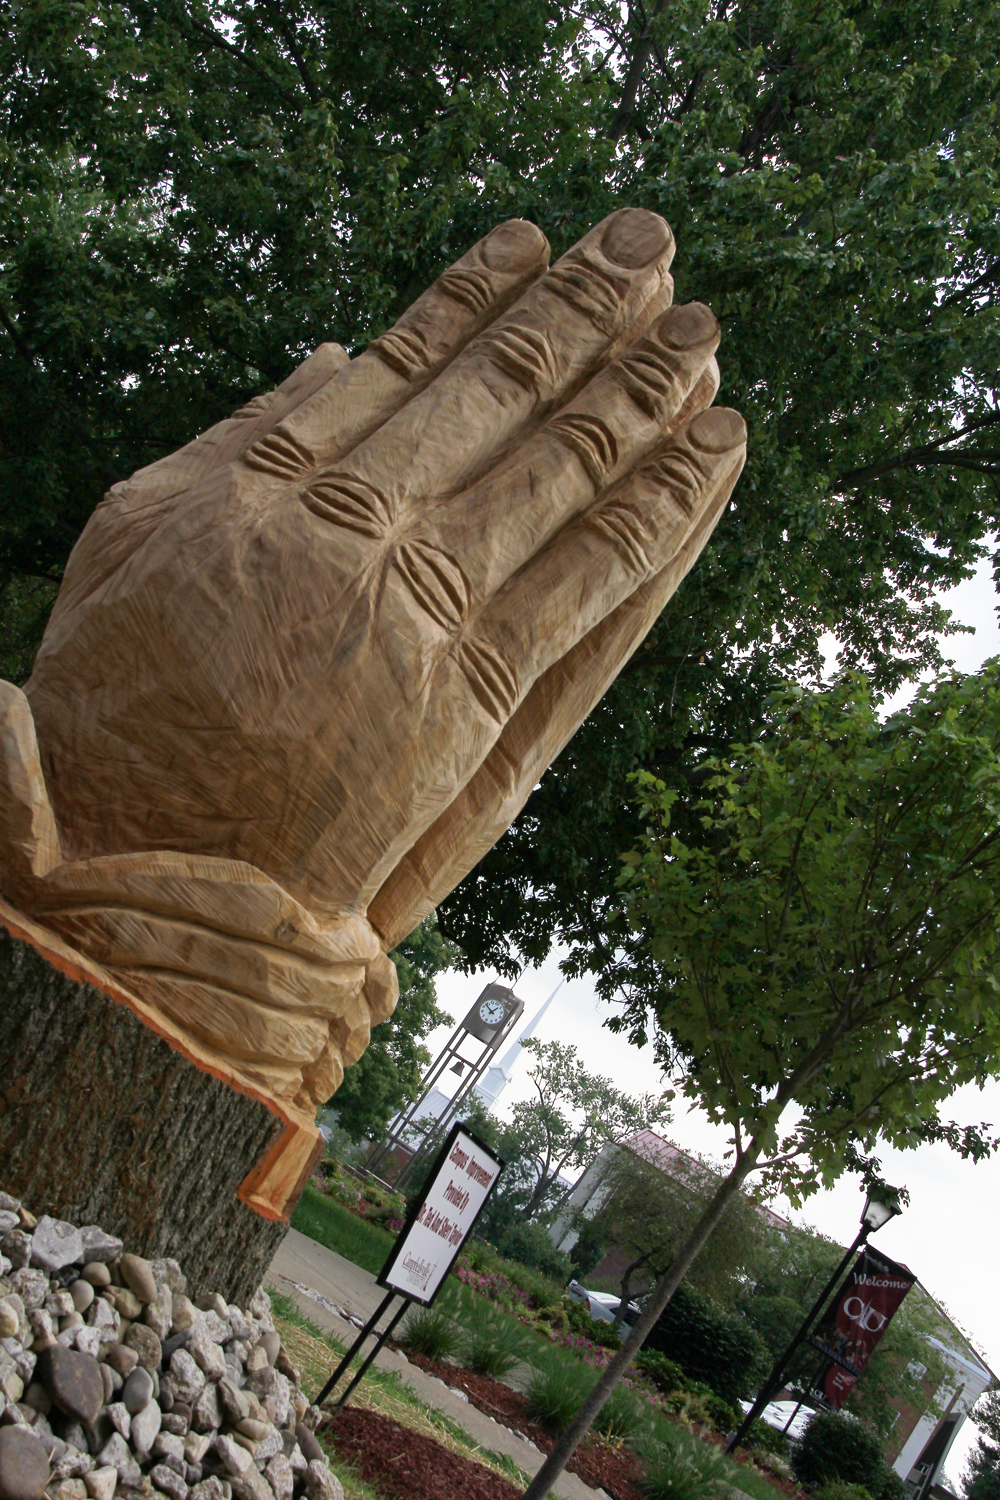 The praying hands was carved by Rob Peterson.  (Campbellsville University Photo by Rachel DeCoursey)